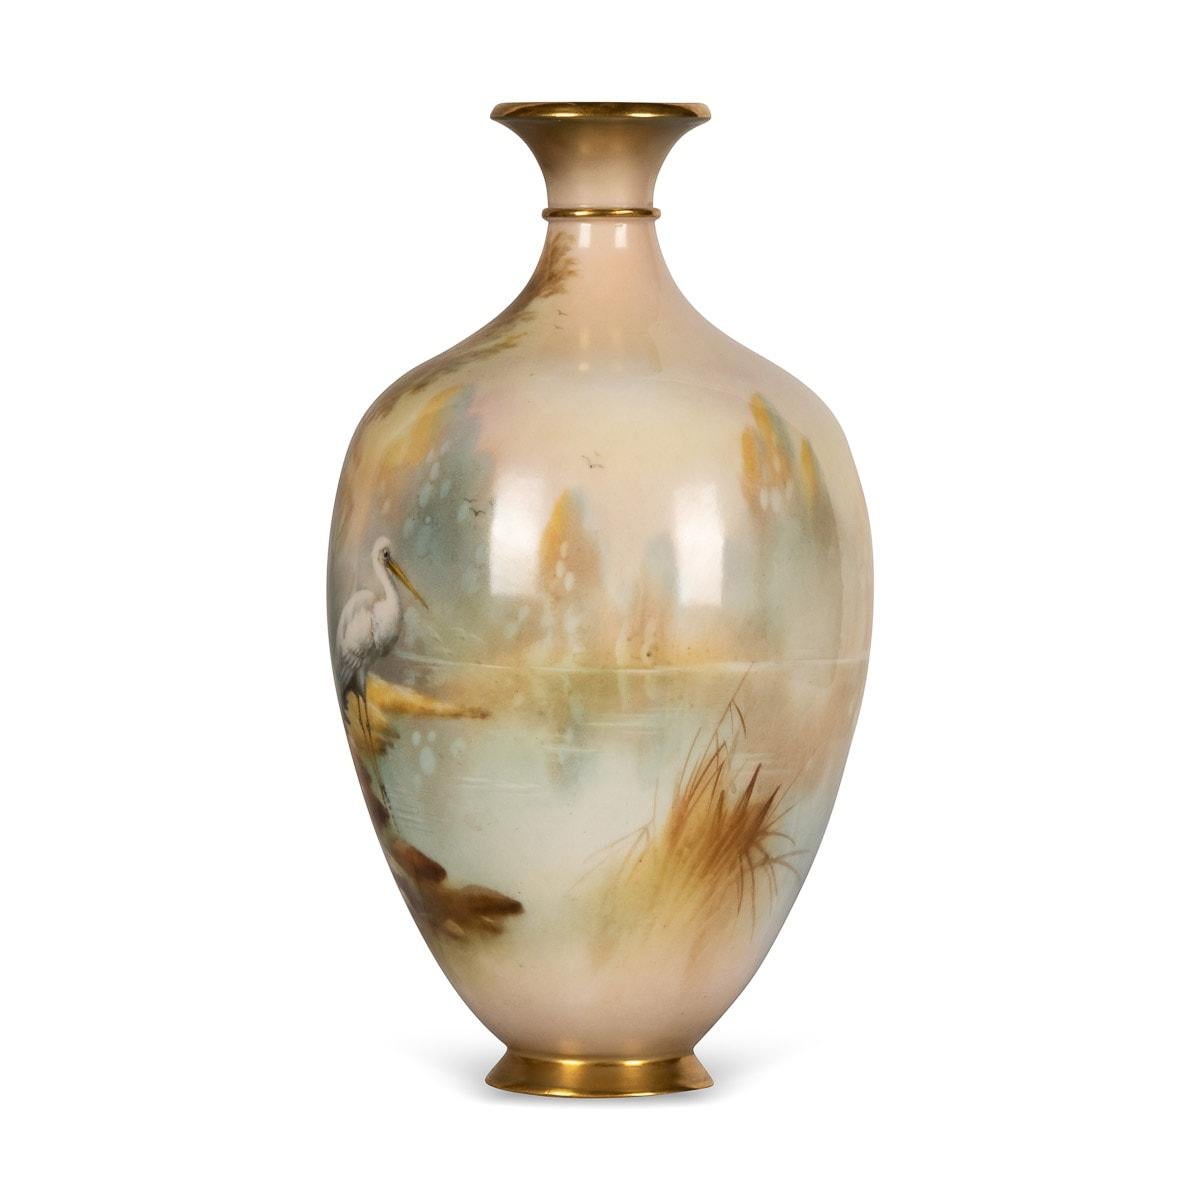 Antique early 20th Century Edwardian Royal Worcester vase. This item was created in the year 1910 in the English town of Worcester. Hand painted on this vase is a scene of wild plants and great egret waterbird, hunting in the waters edge for fish.